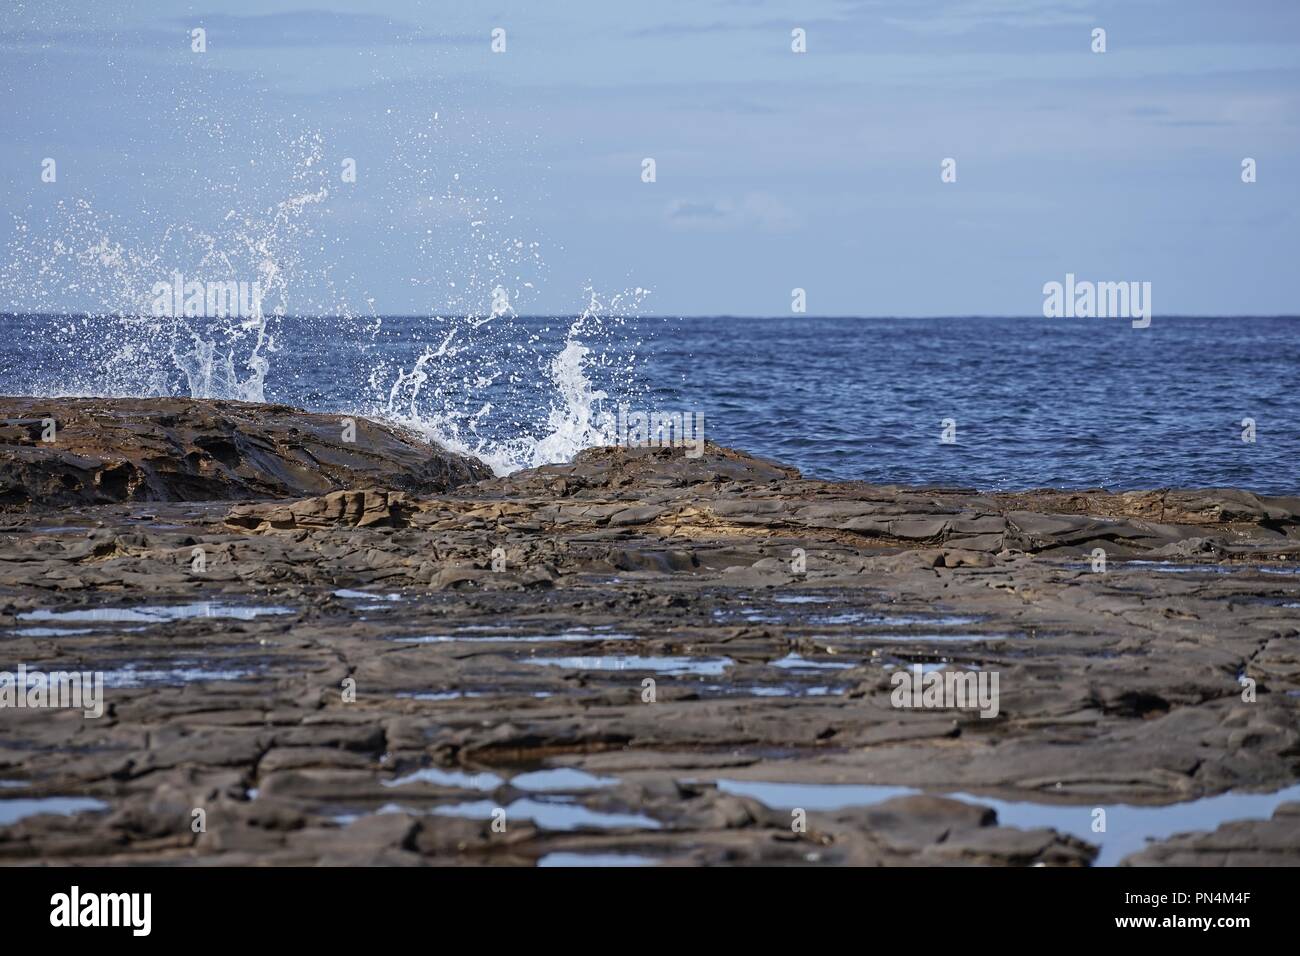 Looking across a rock platform, or shelf, at the sea and sky, with a wave splashing against the edge. Stock Photo